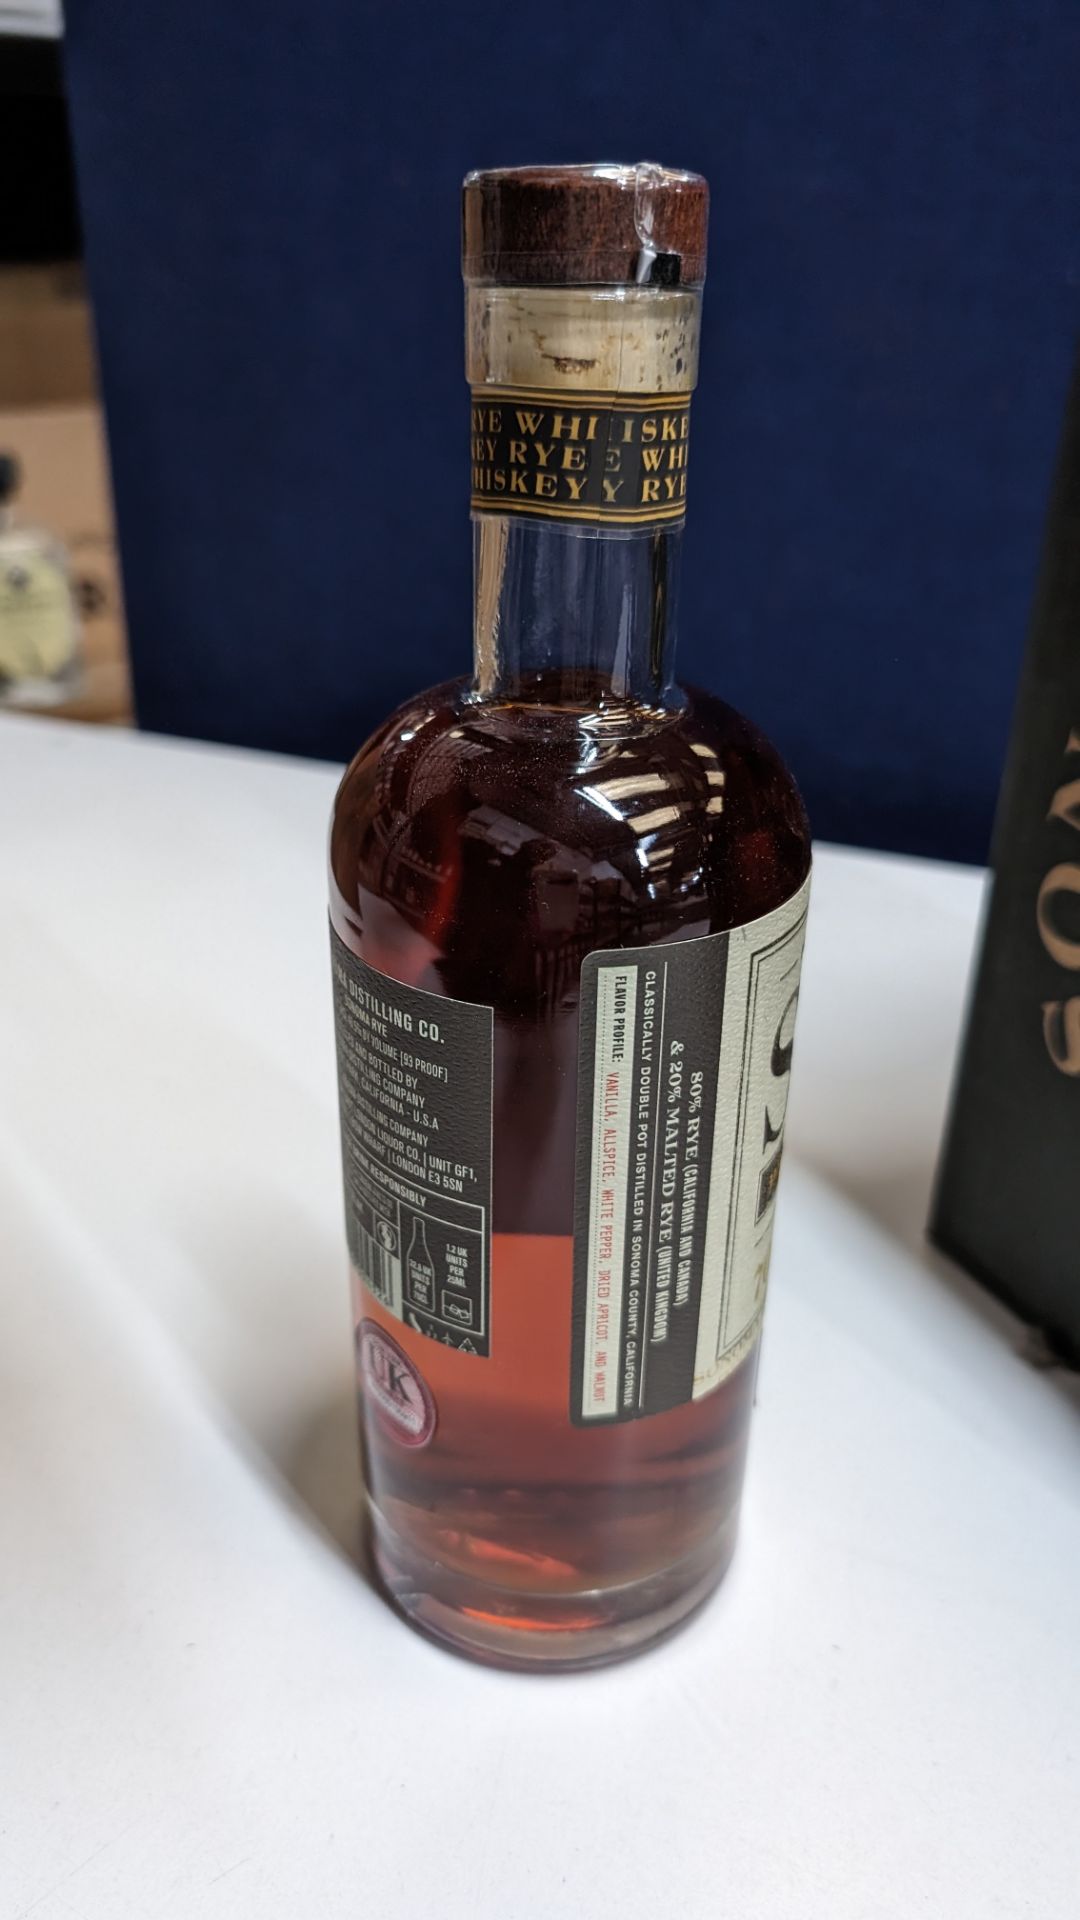 6 off 700ml bottles of Sonoma Rye Whiskey. In Sonoma branded box which includes bottling details on - Image 6 of 6